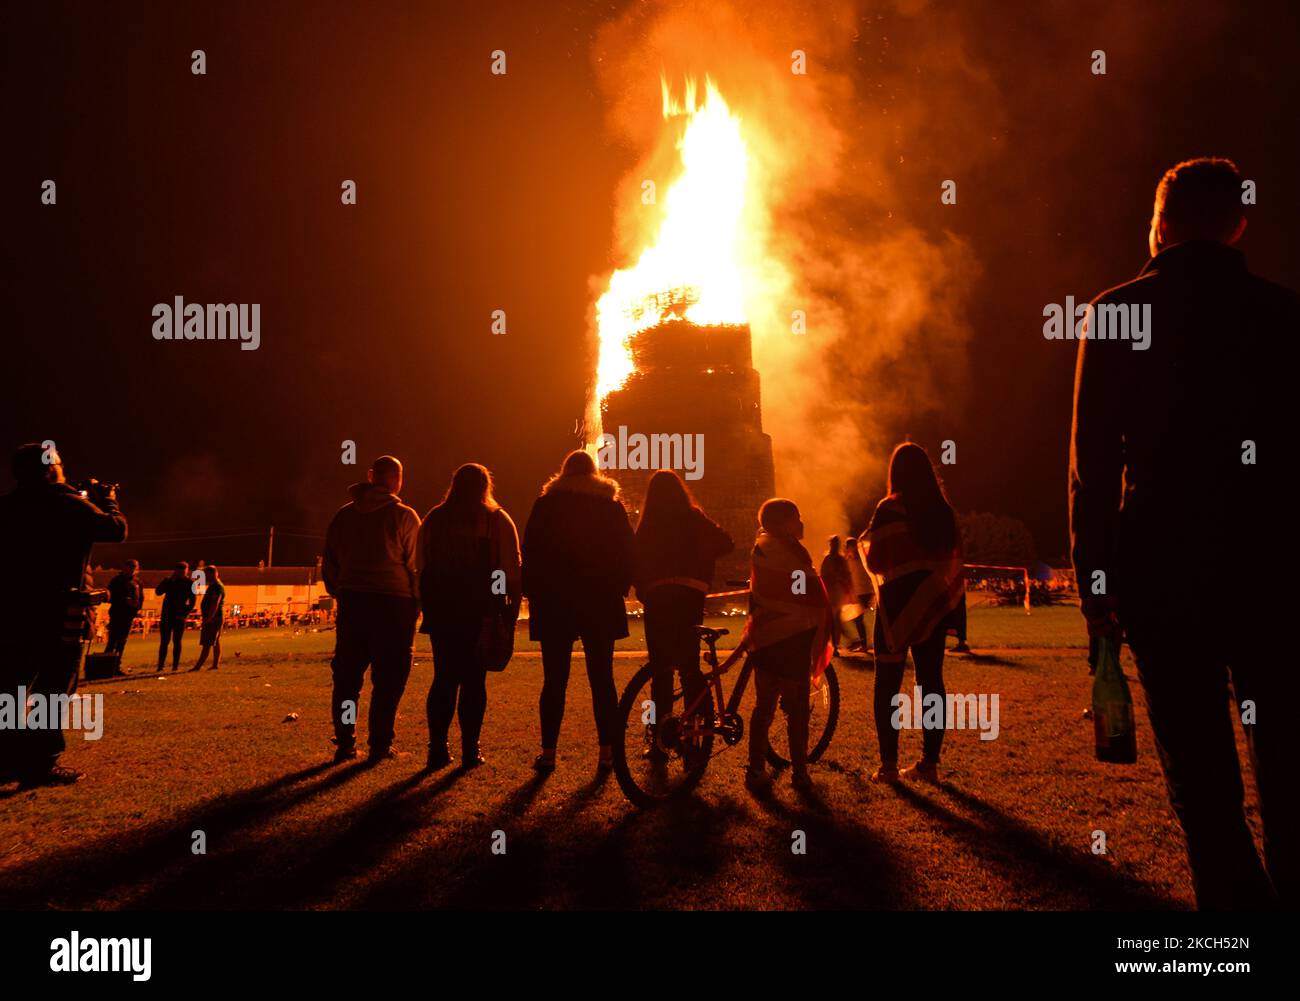 People watch a large bonfire during the Eleventh Night marking the start of the unionist Twelfth celebrations, in Craigy Hill, Larne. Tonight, large bonfires are lit in many Protestant loyalist neighbourhoods of Northern Ireland. Bonfires were originally lit to celebrate the Glorious Revolution (1688) and victory of Protestant king William of Orange over Catholic king James II at the Battle of the Boyne (1690), which began the Protestant Ascendancy in Ireland. On Monday, 12 July 2021, in Larne, County Antrim, Northern Ireland (Photo by Artur Widak/NurPhoto) Stock Photo